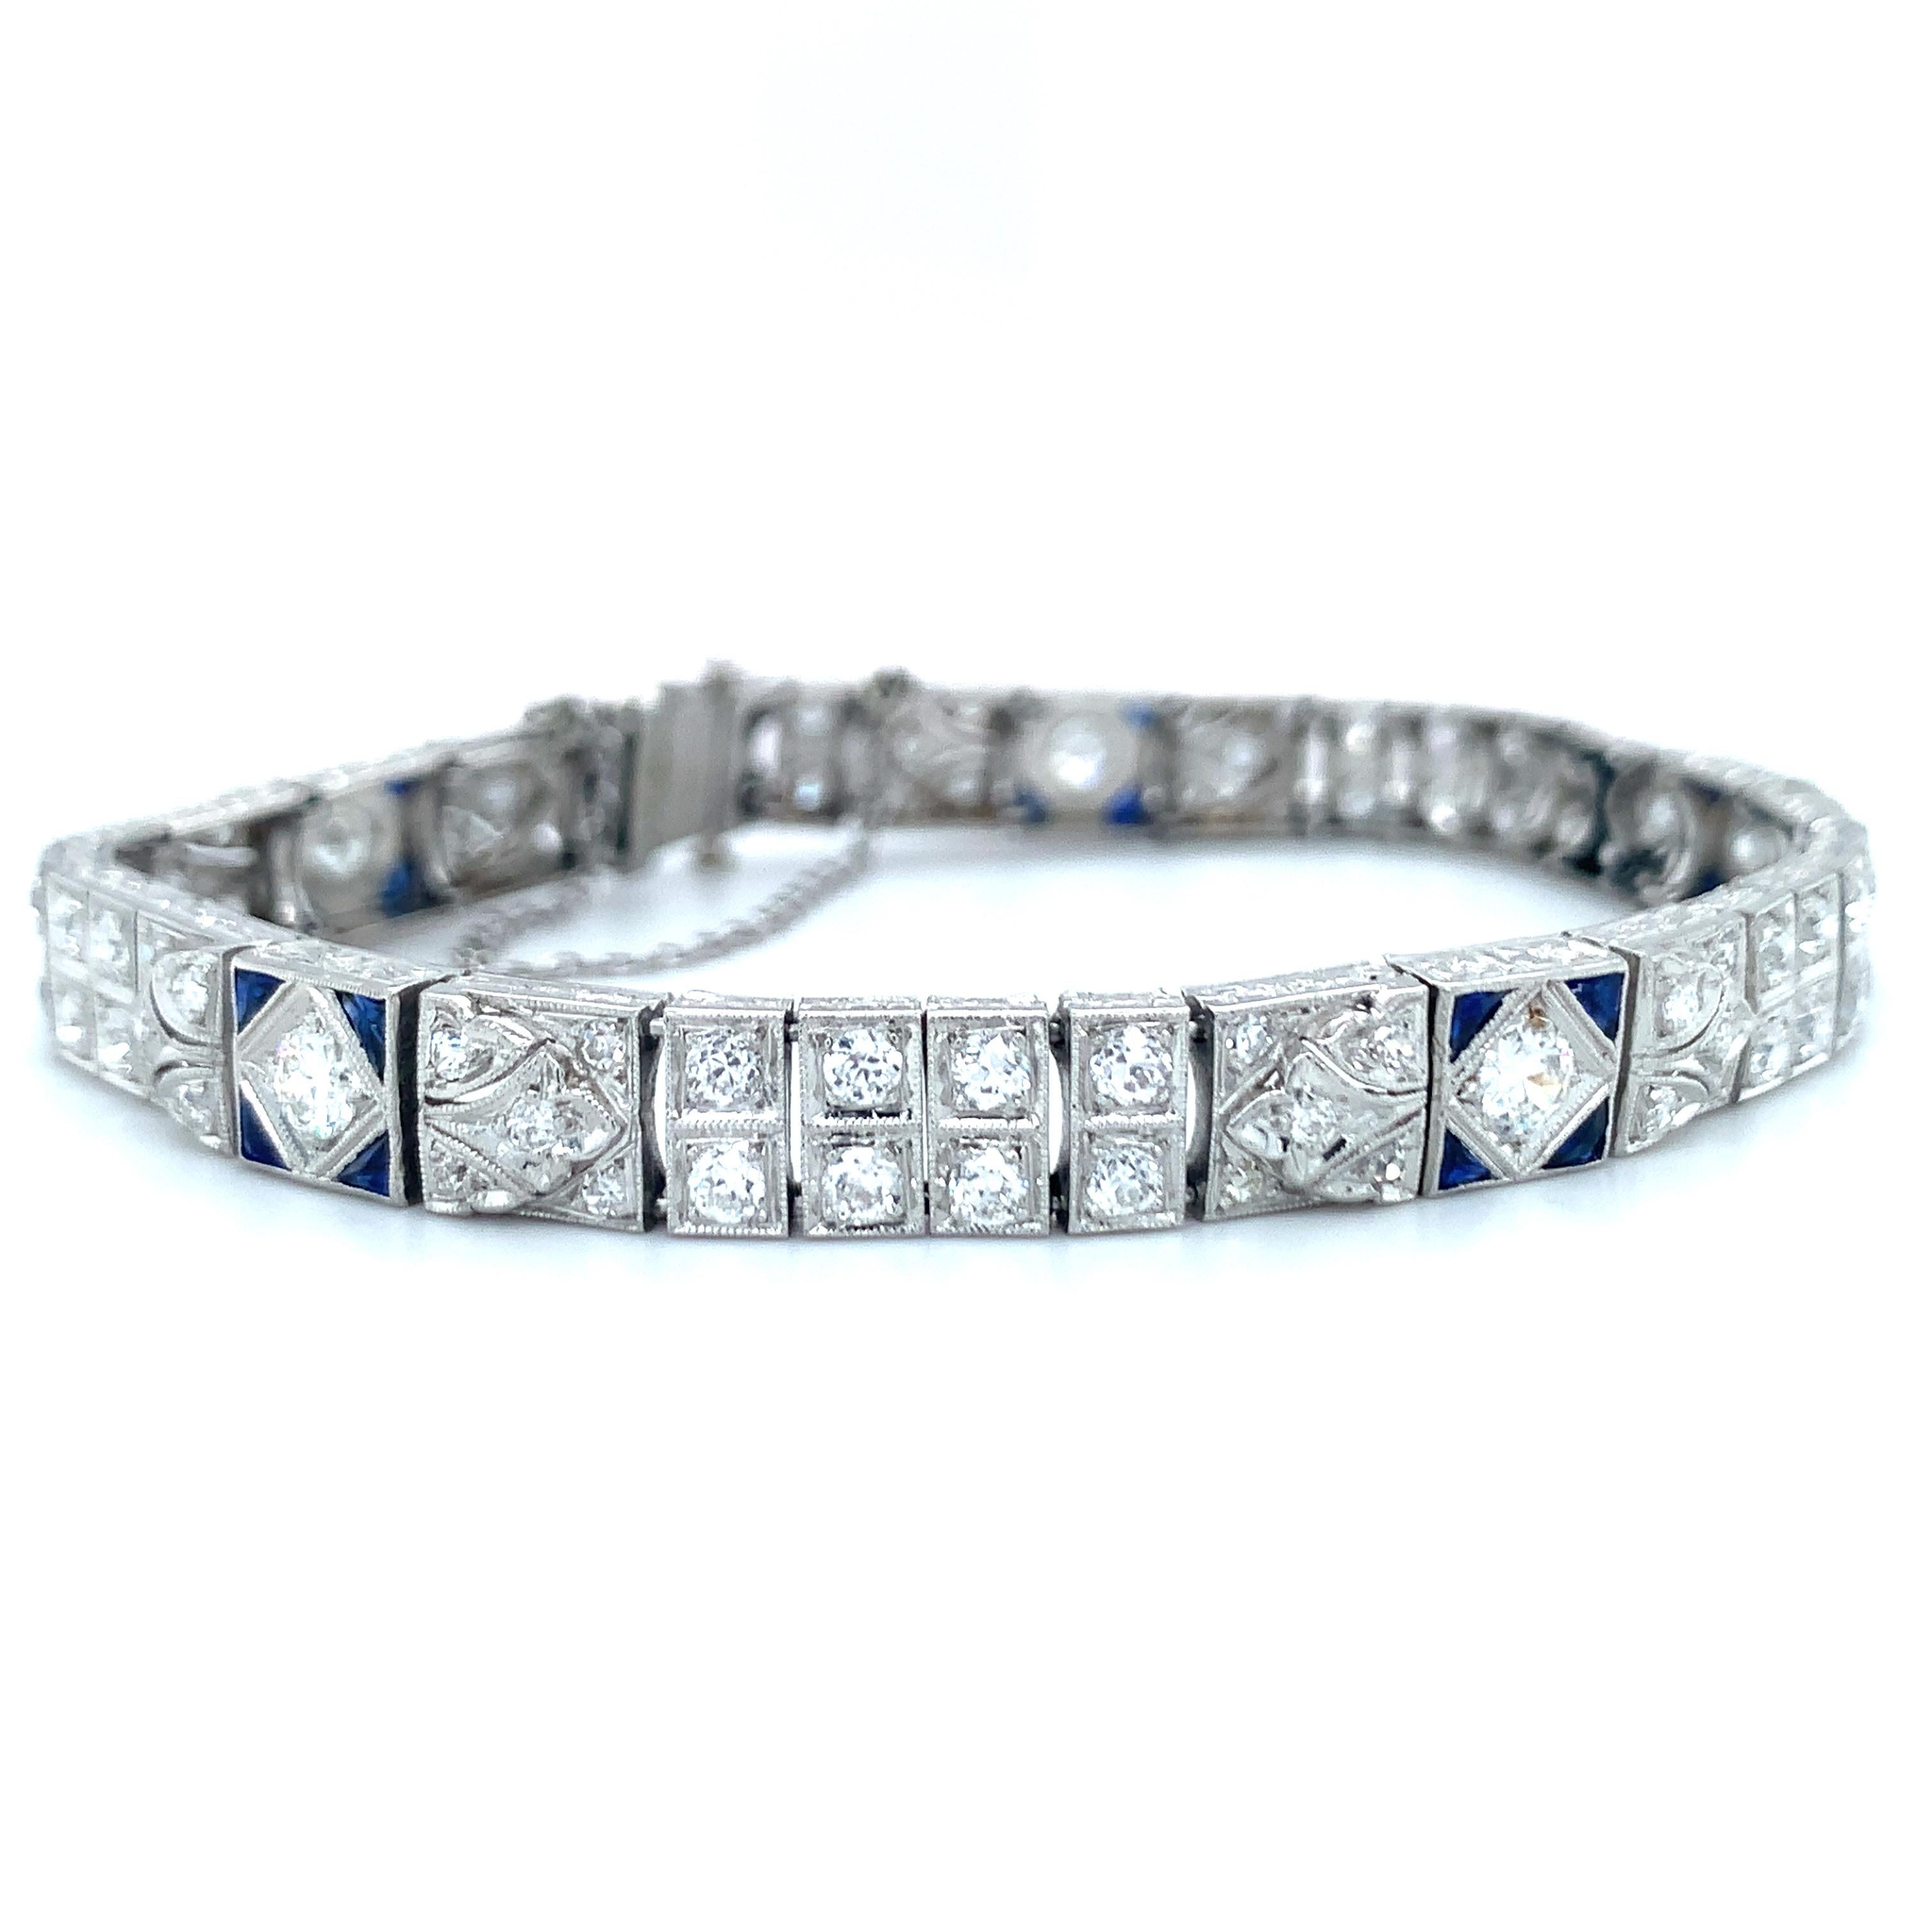 One Art Deco diamond and sapphire bracelet handmade in platinum featuring 95 old European cut diamonds weighing a total of 4 ct. with I-J color and SI-1 clarity. The bracelet holds a flexible make and is enhanced with sapphire accents and engraved